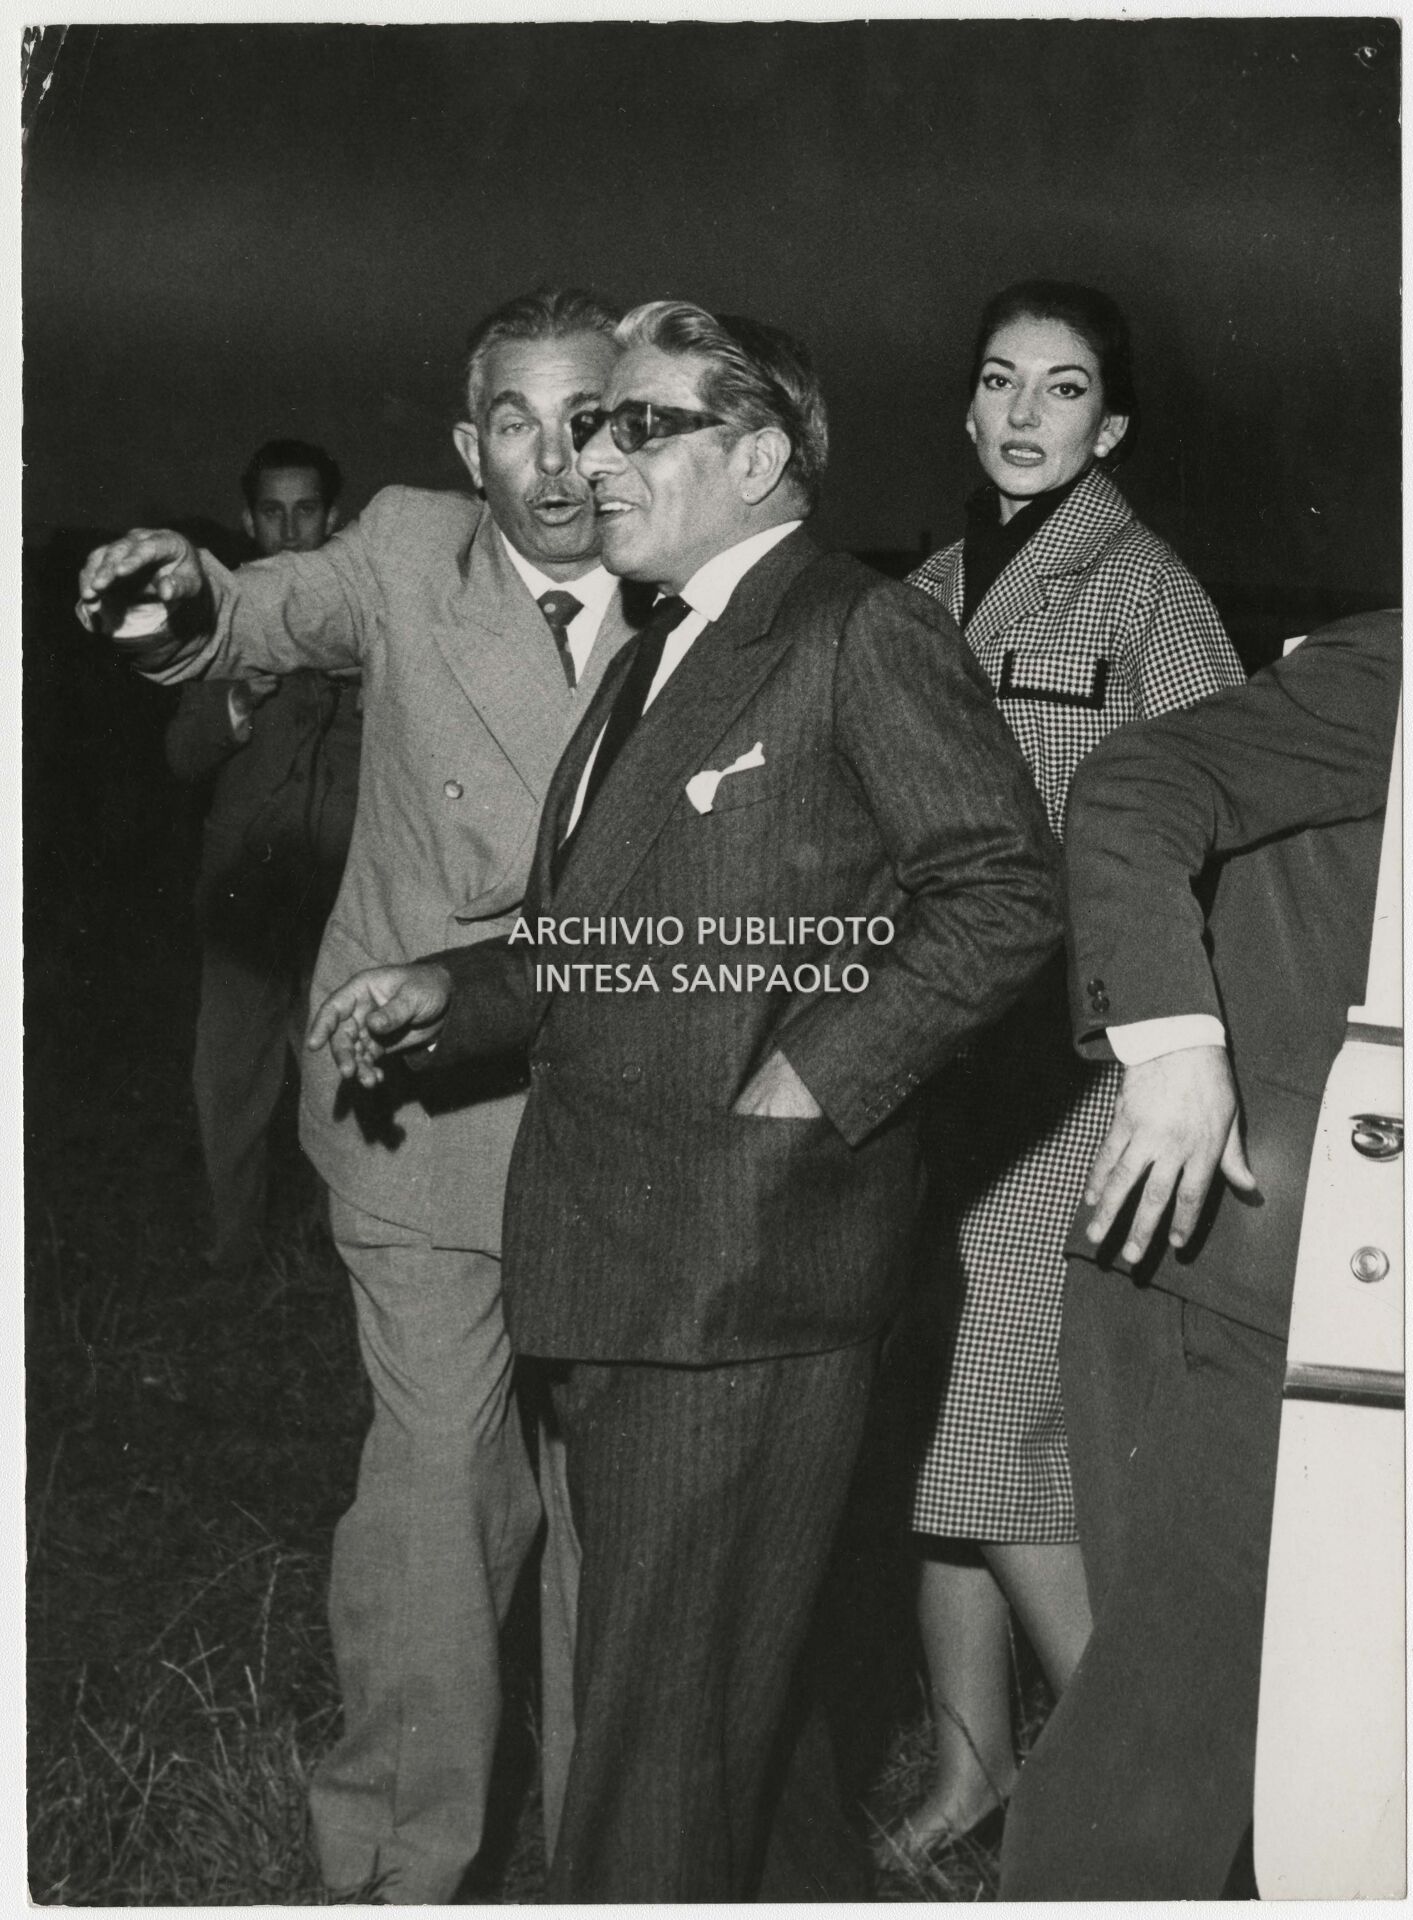 Original caption by Publifoto Agency on the back of the print:
			"One of the shots of the "Callas-Onassis affair". The public escapes of the couple that was on everyone's lips began on Saturday 29 August at the "Sea Club" in Monte Carlo. But the first photograph was taken on Thursday 3 September 1959 in Milan. Onassis arrived that afternoon from Venice in his personal plane. The two entered a Milanese night-club [the Montemerlo (Ed.)] at 10 p.m. They dined, danced, drank. They left five hours later and finally smiled at the photographer Nicola Giordano of Publifoto who was waiting for them. A short trip from the night club to the hotel, where the shipowner was staying, for a last "drink". The next day, Friday 4 September, the photographer was still waiting outside the hotel: and at 3.45 p.m. the couple came out and got into the car. Also on Friday. After a stop at the singer's house, here we are at Bresso airport. Maria Meneghini Callas says goodbye to the shipowner who is leaving for Venice in his seaplane. The few people present notice that the lady "is very emotional"."